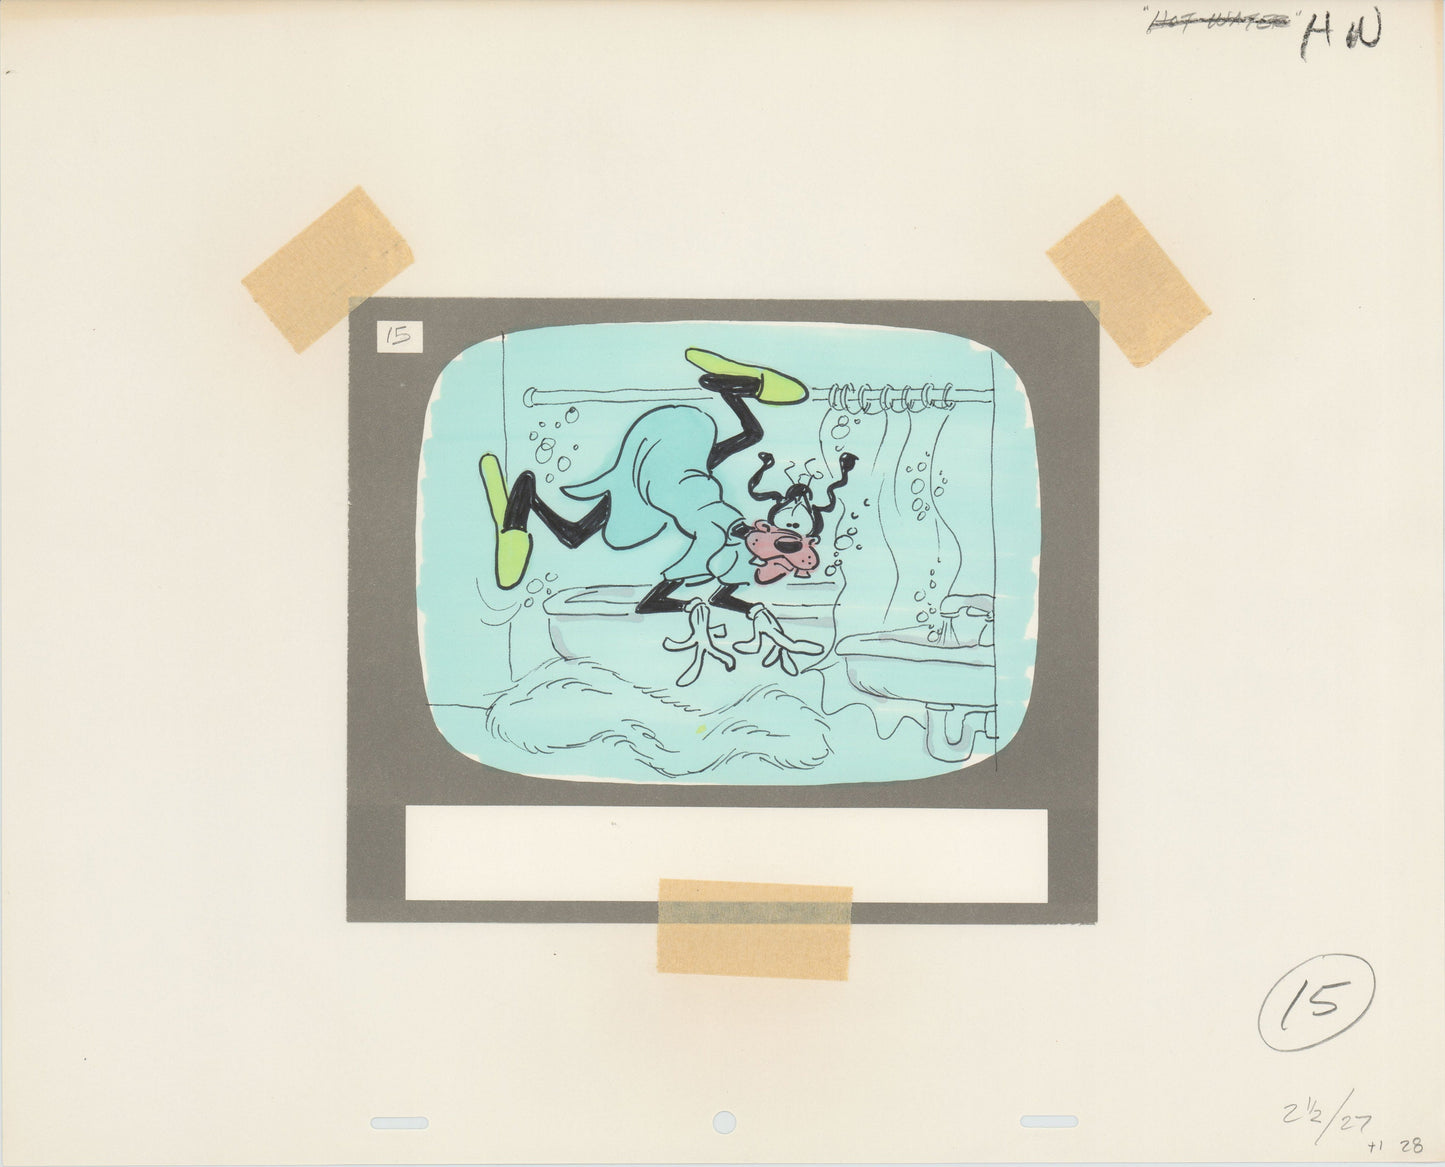 Goofy Willie Ito Hand-drawn Walt Disney Production Animation Storyboard 1970's or 1980's 204 from "Hot Water" Filmstrip